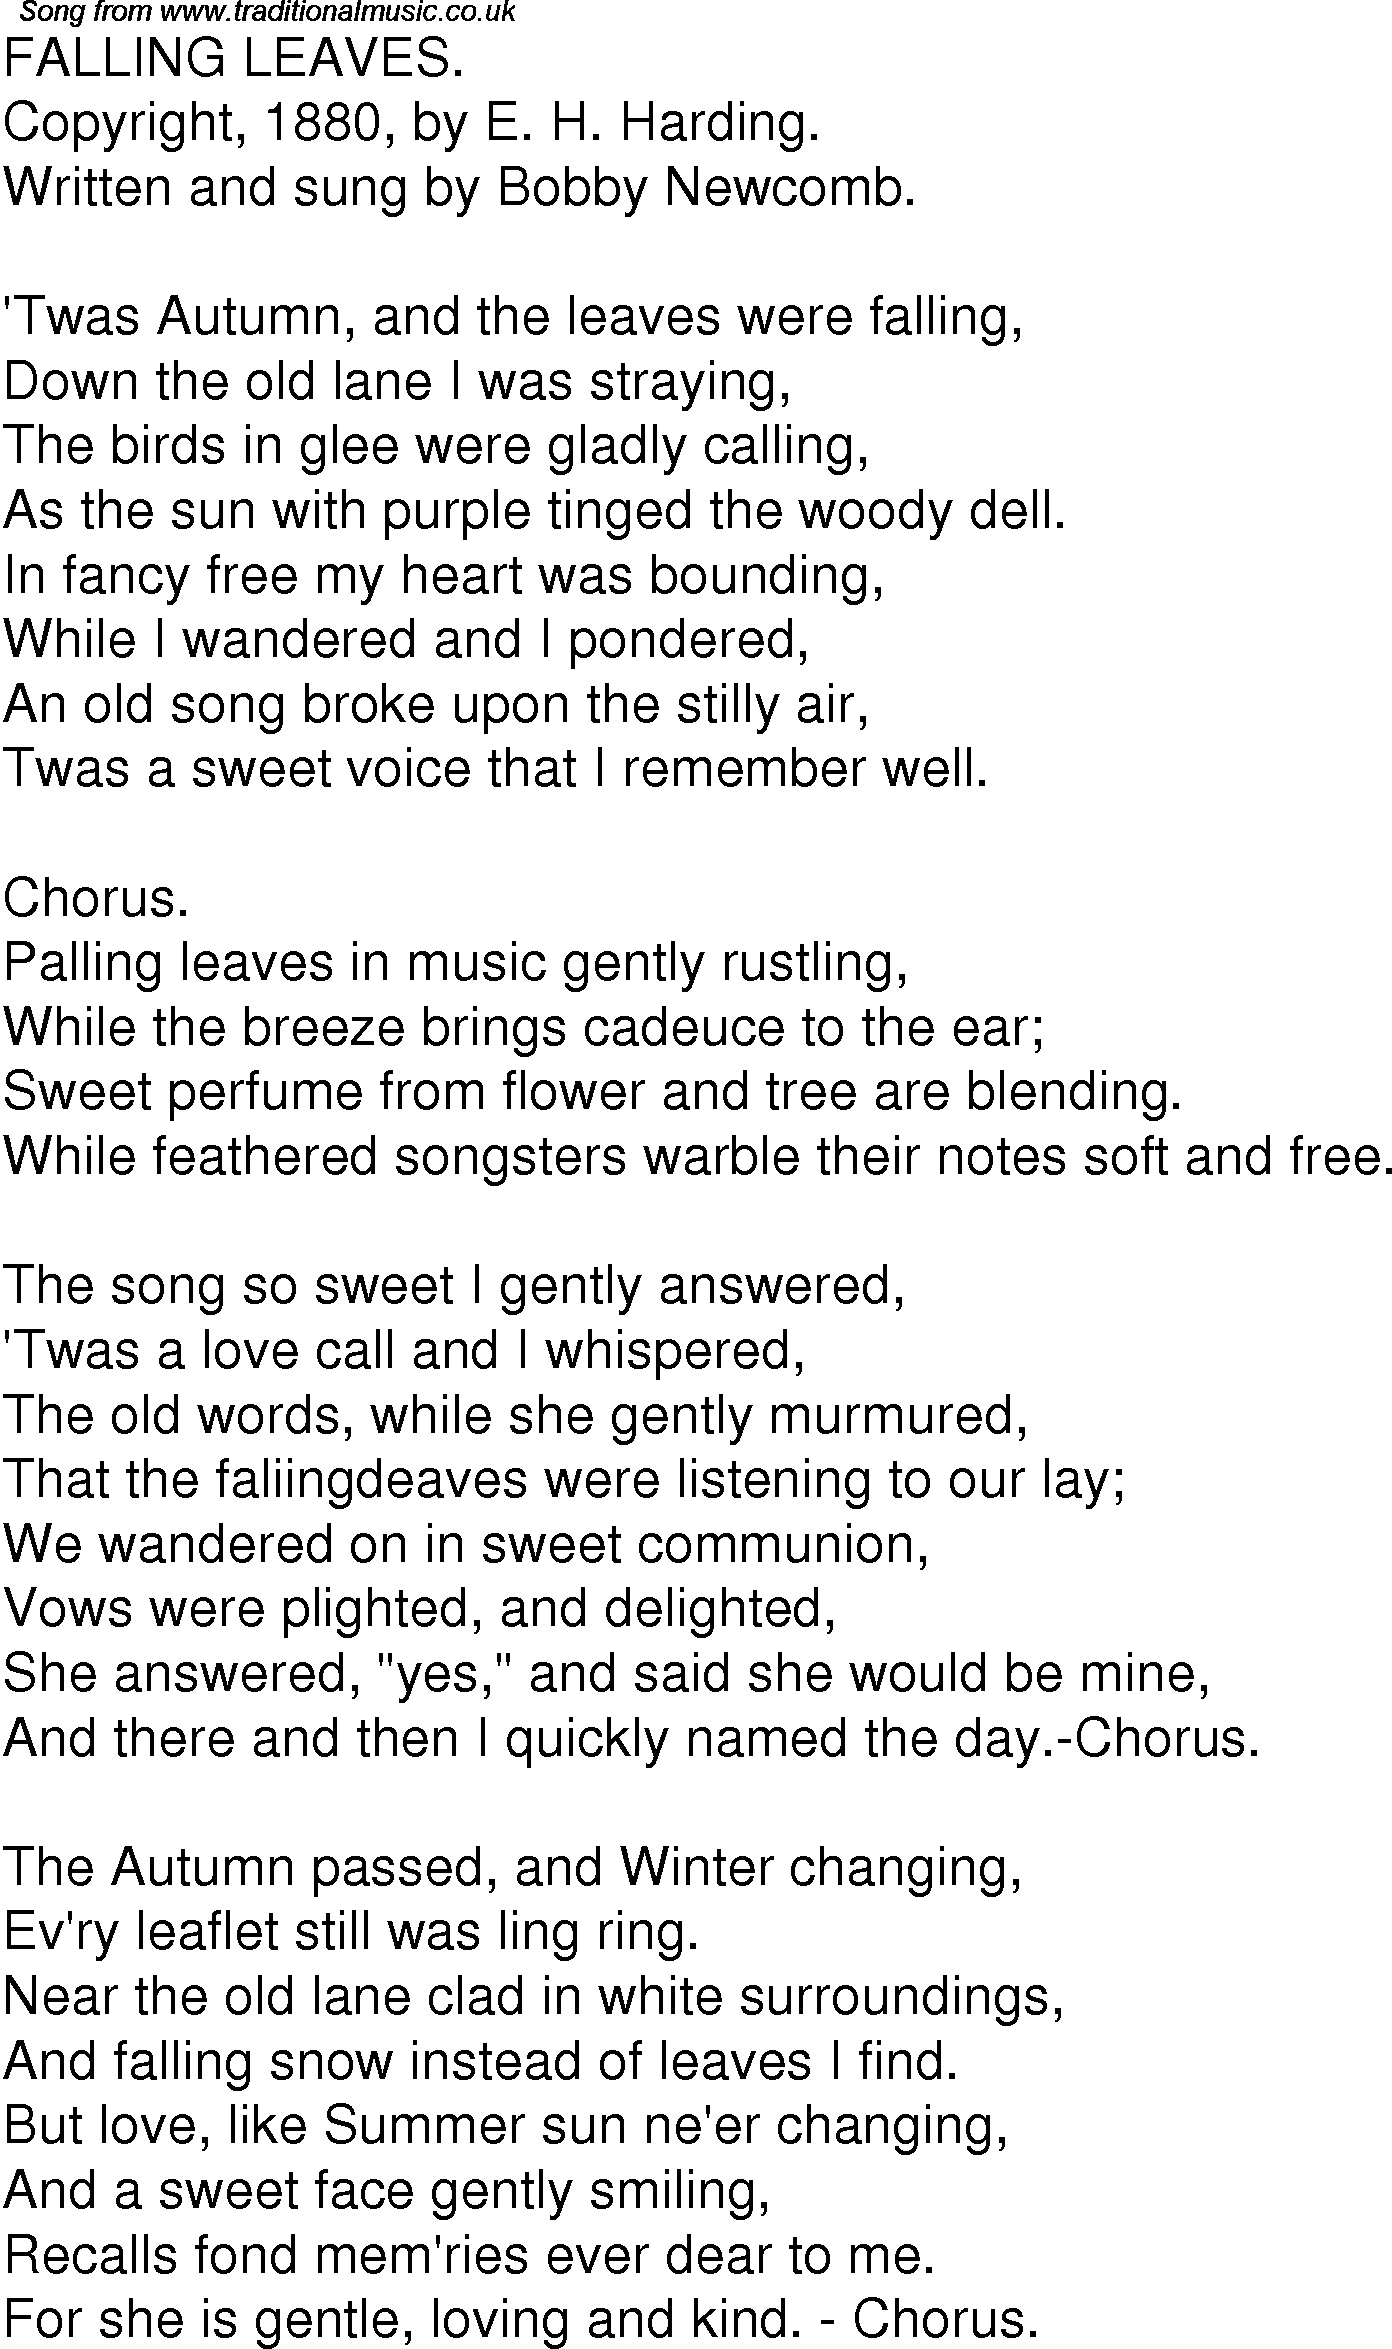 Old Time Song Lyrics for 08 Falling Leaves